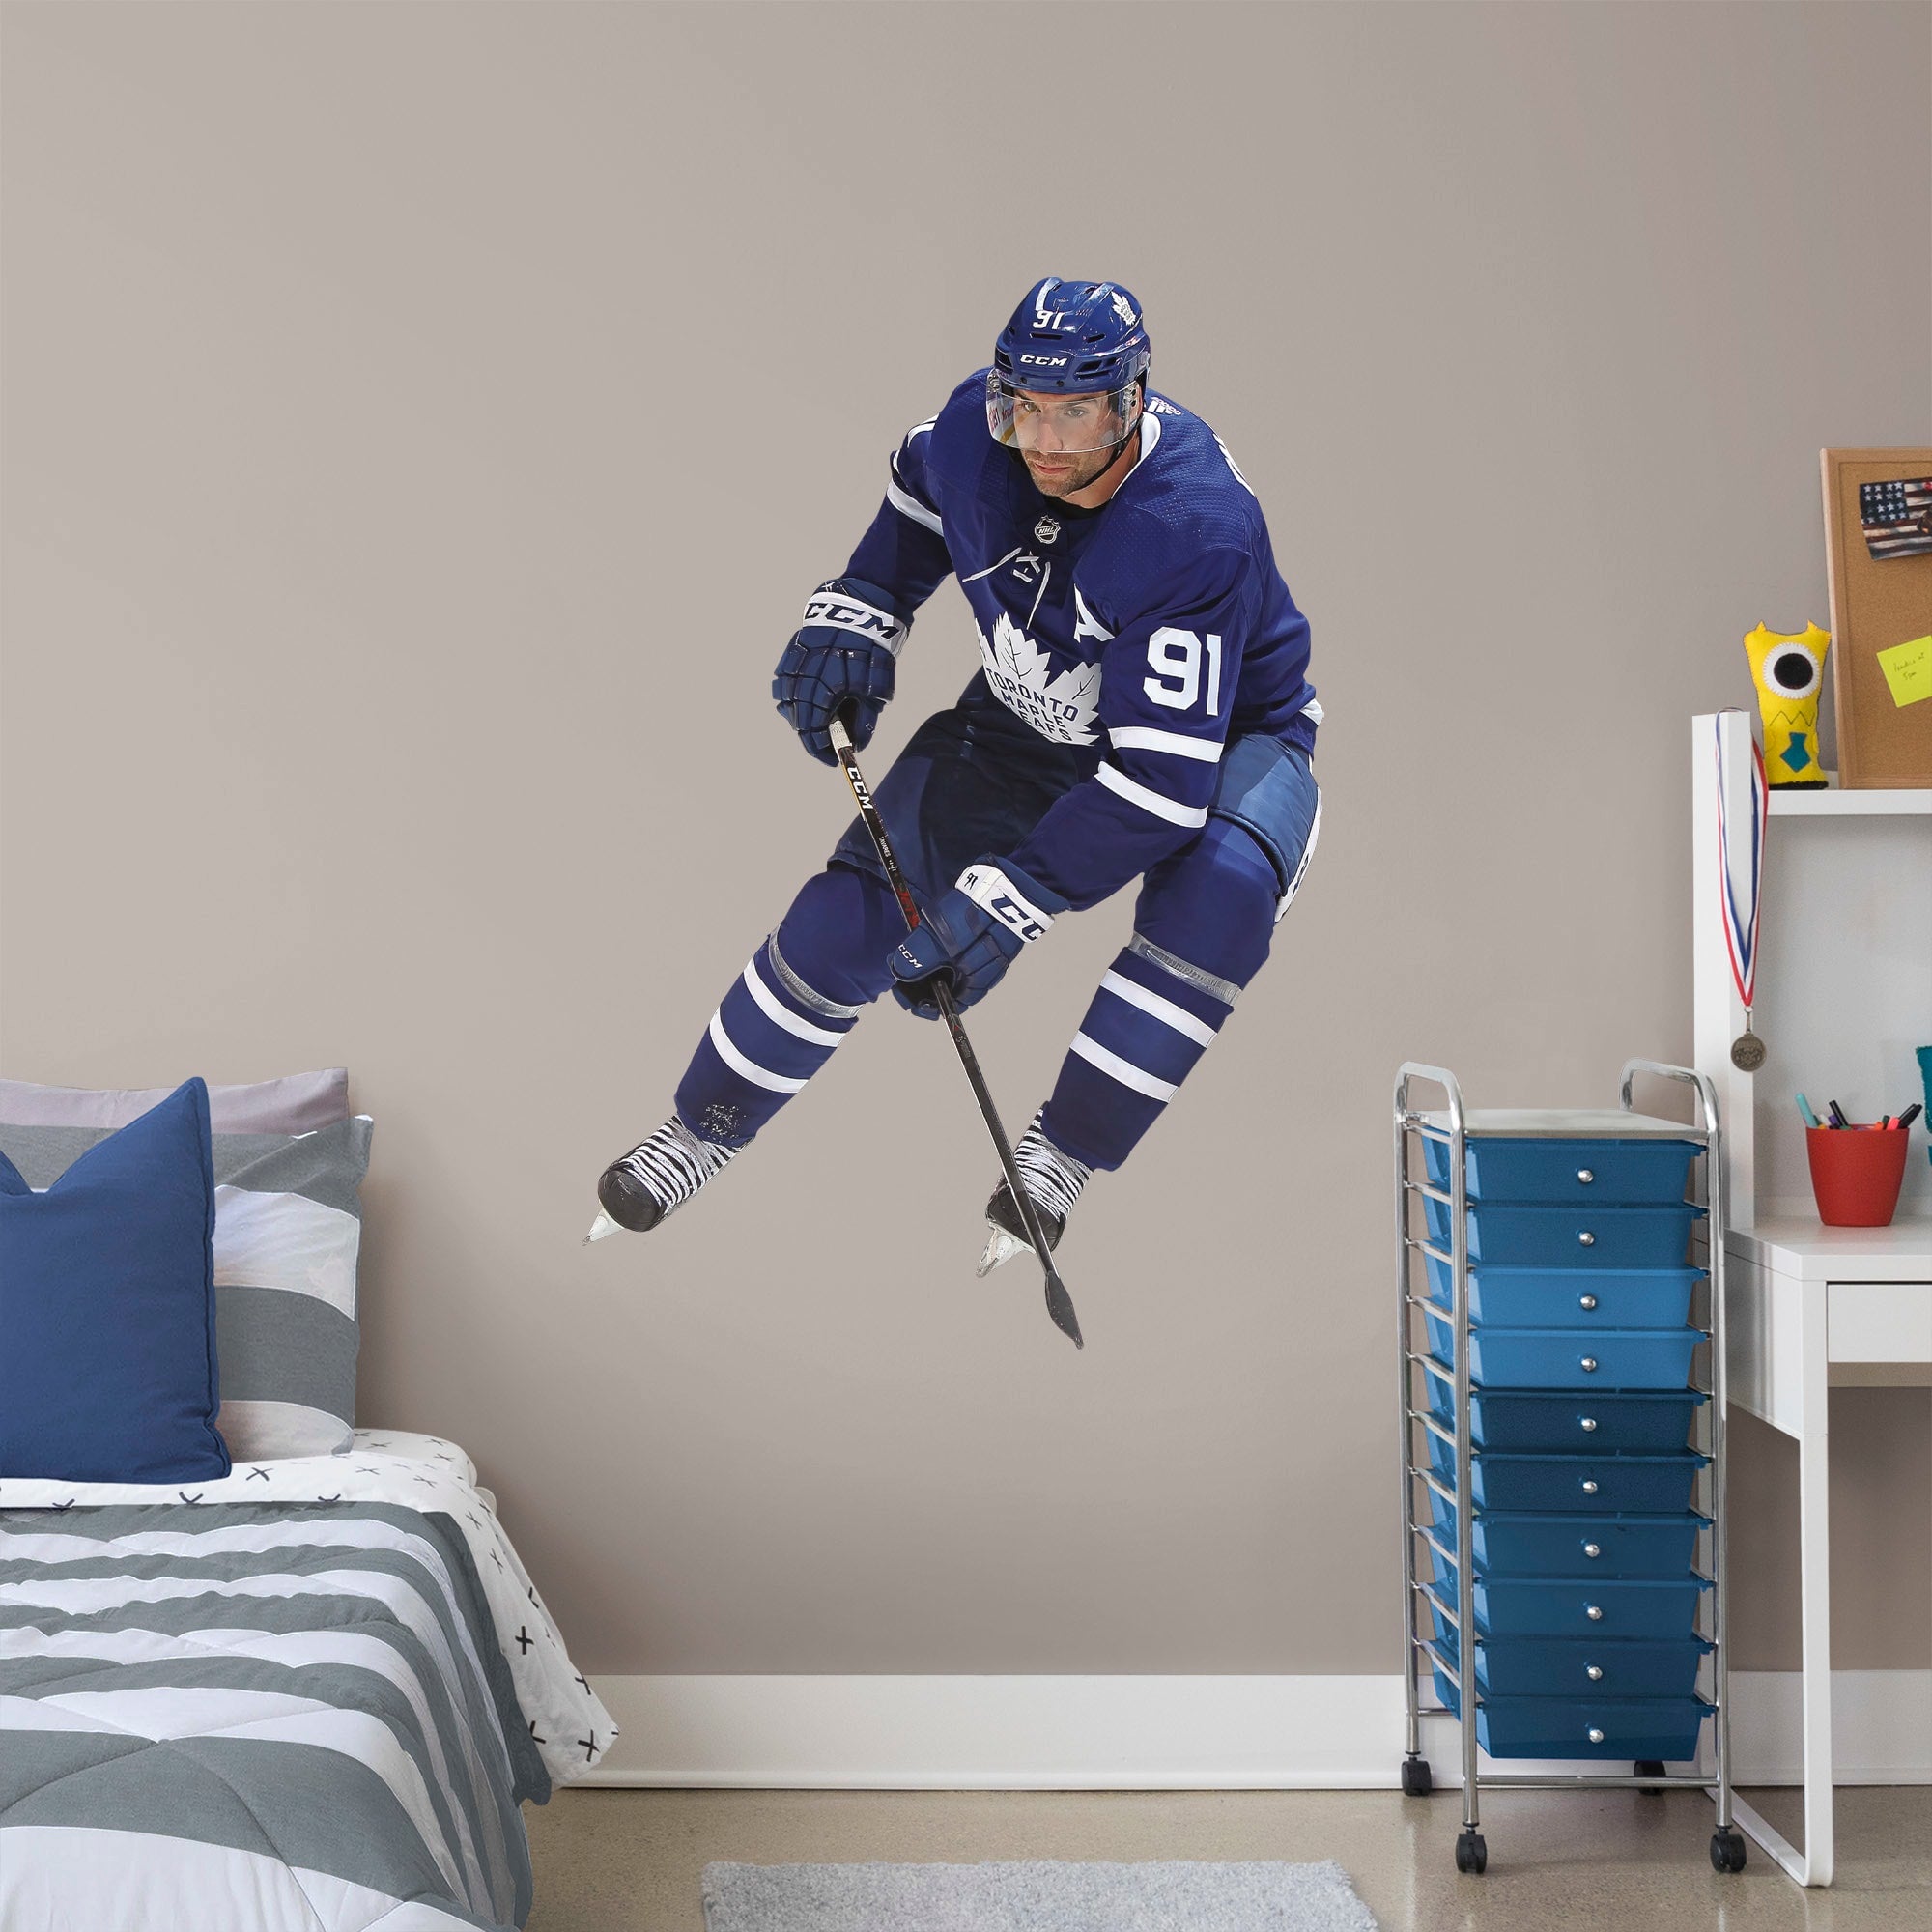 John Tavares for Toronto Maple Leafs - Officially Licensed NHL Removable Wall Decal Giant Athlete + 2 Decals (35"W x 51"H) by Fa